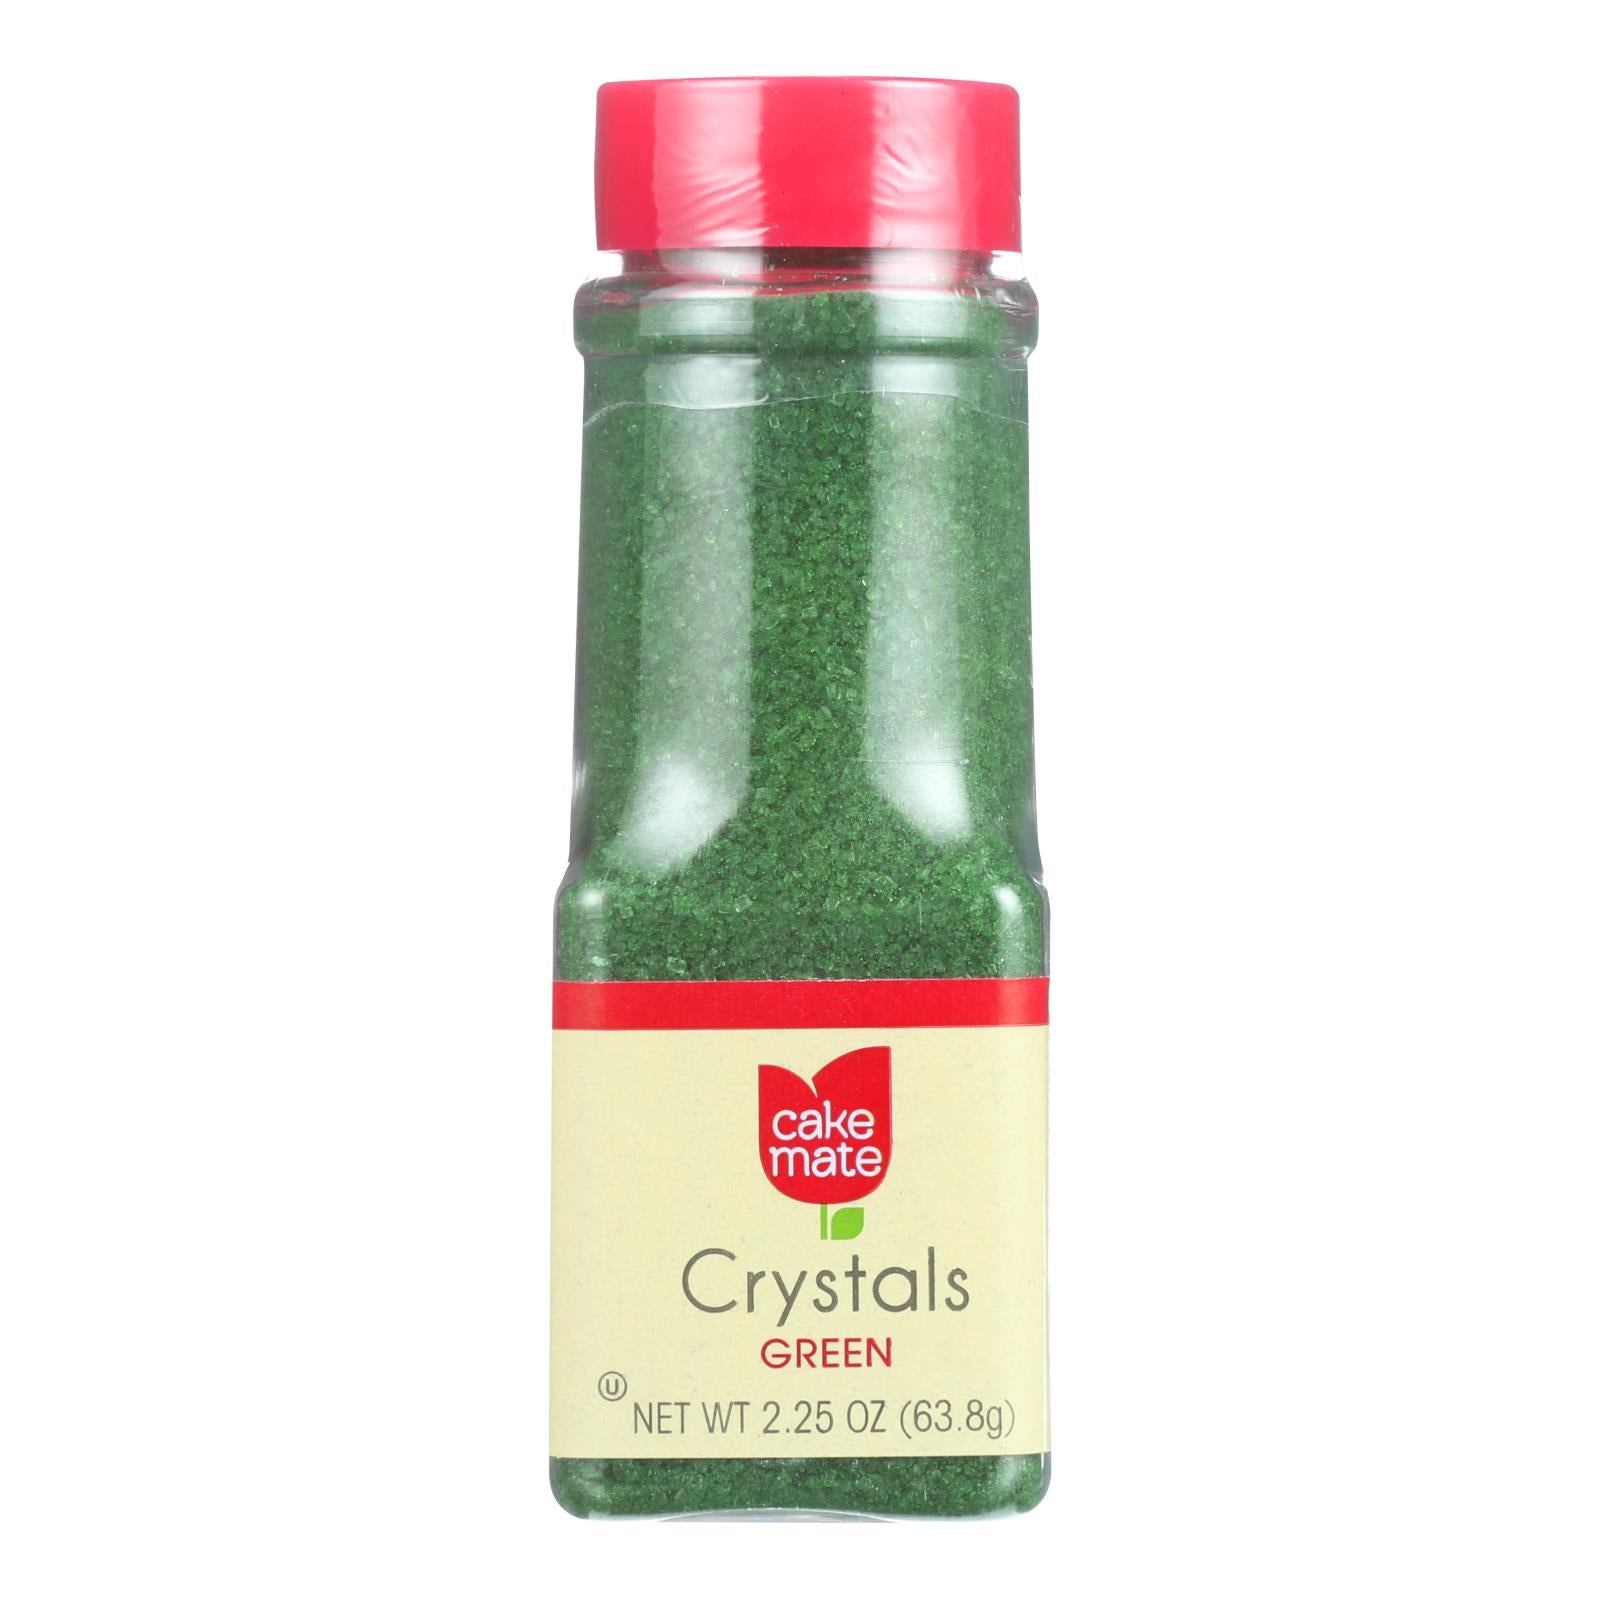 Cake Mate - Decorating Decors - Crystals - Green - 2.25 Oz - Case Of 6 - Whole Green Foods